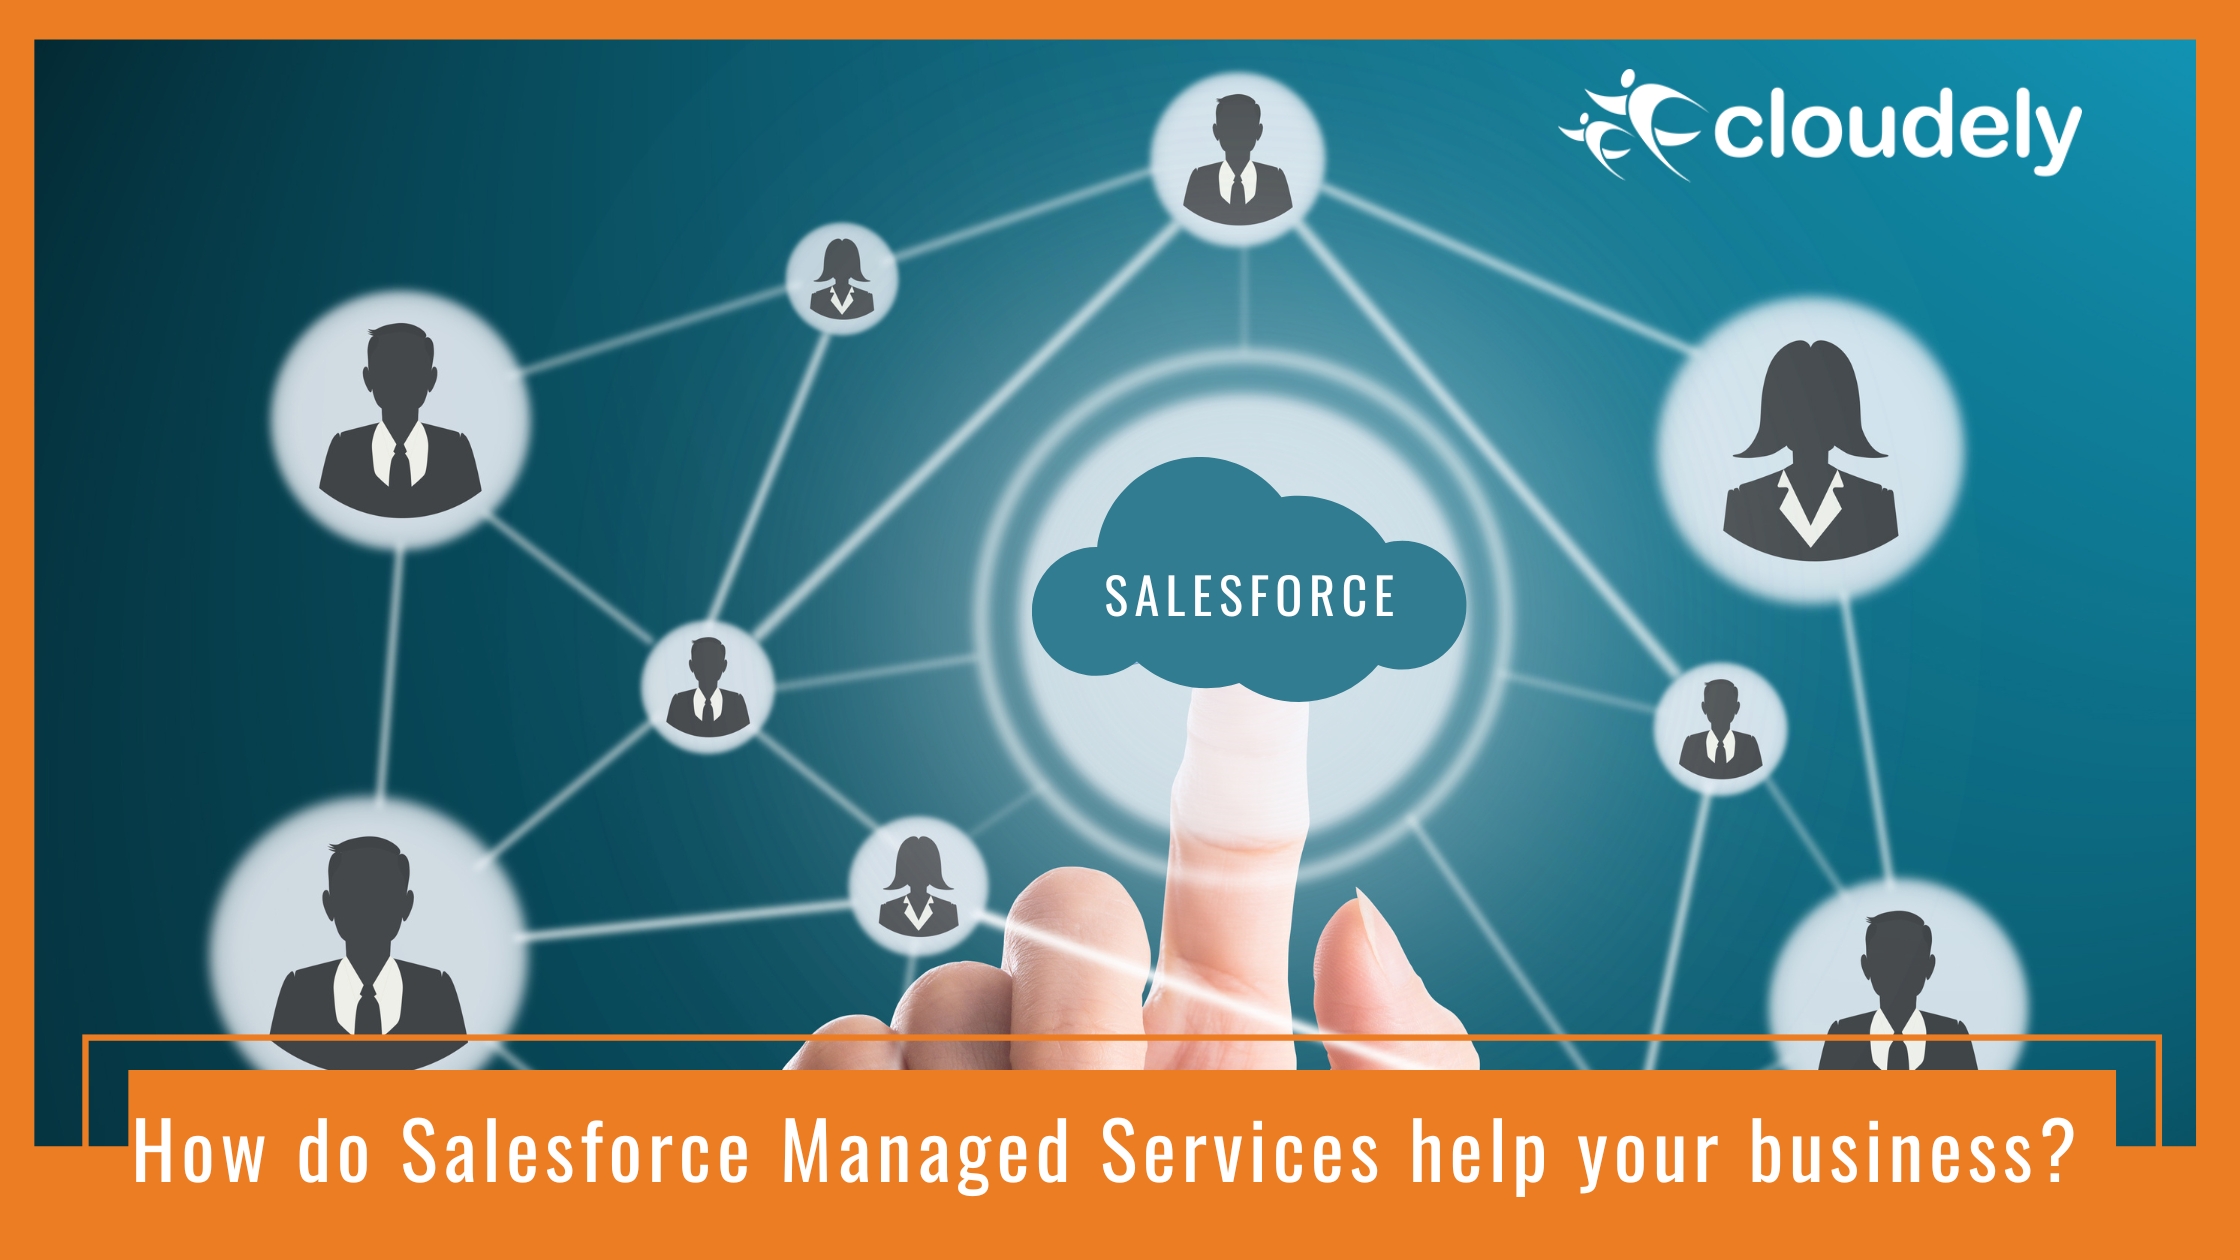 Salesforce managed services help businesses